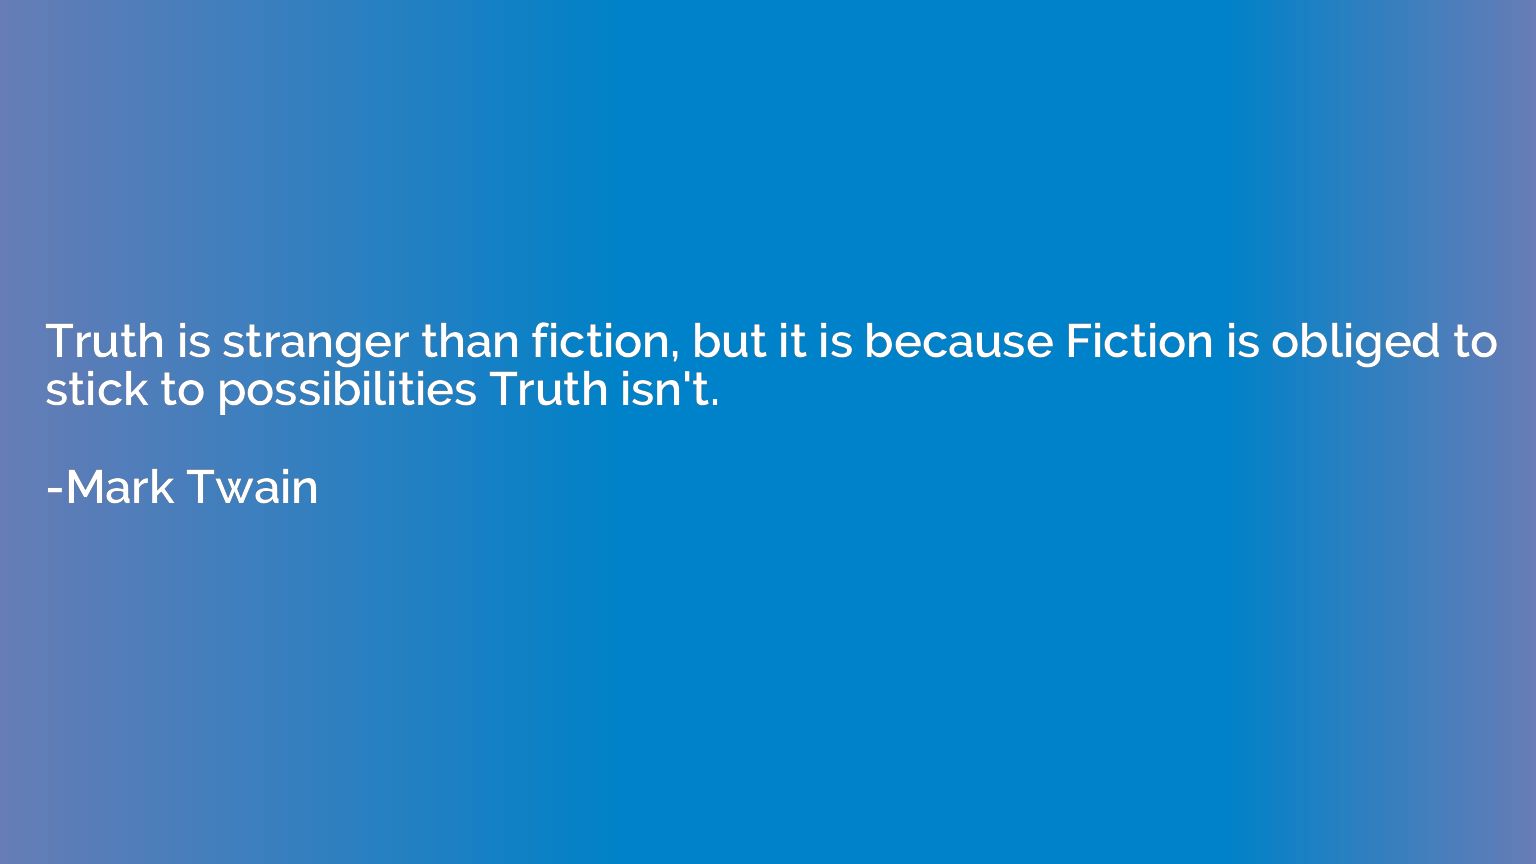 Truth is stranger than fiction, but it is because Fiction is